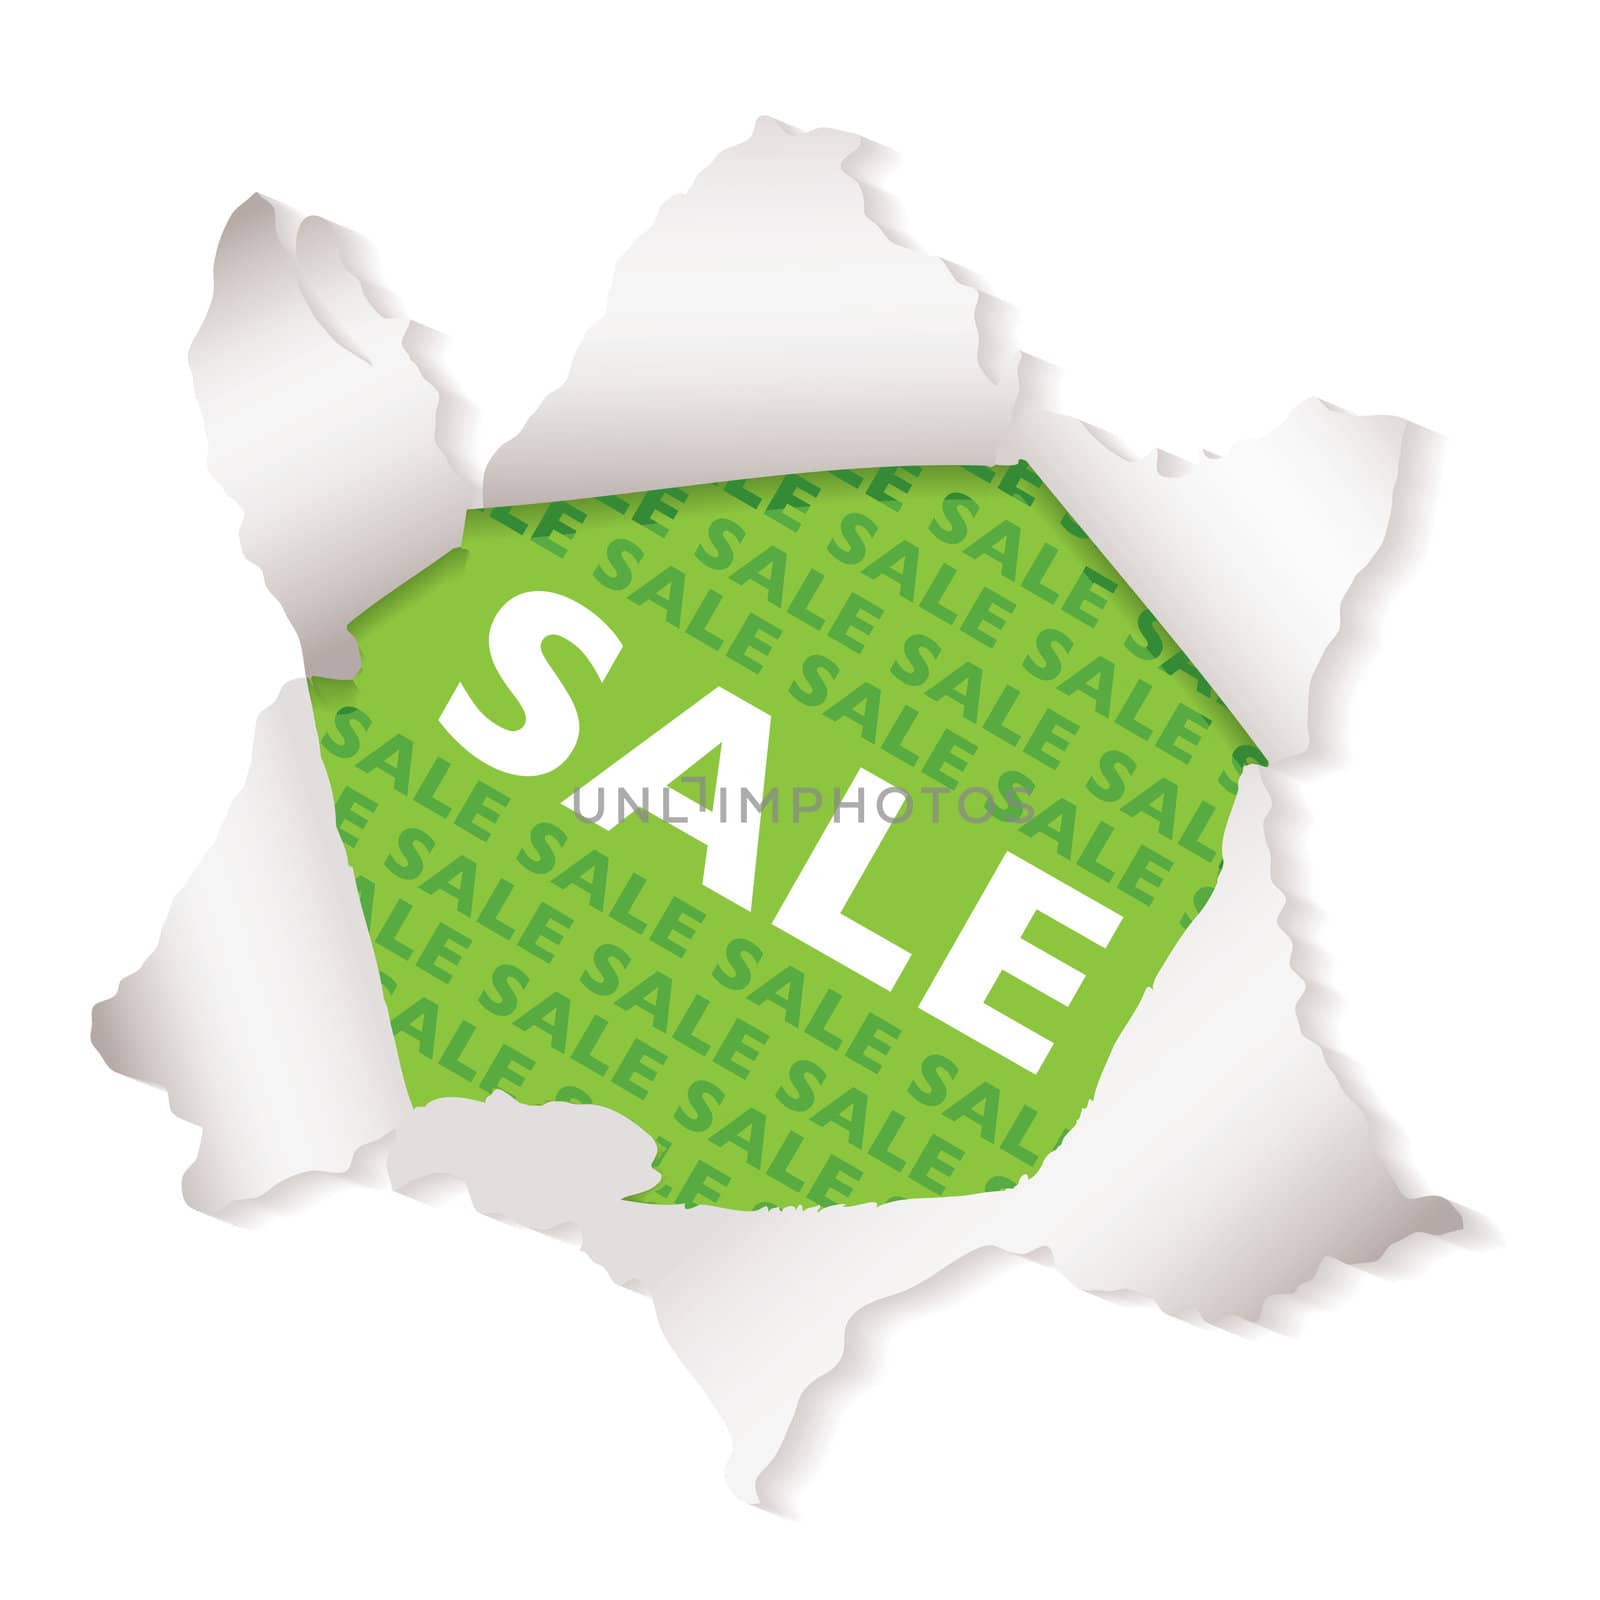 Sale paper explode green by nicemonkey